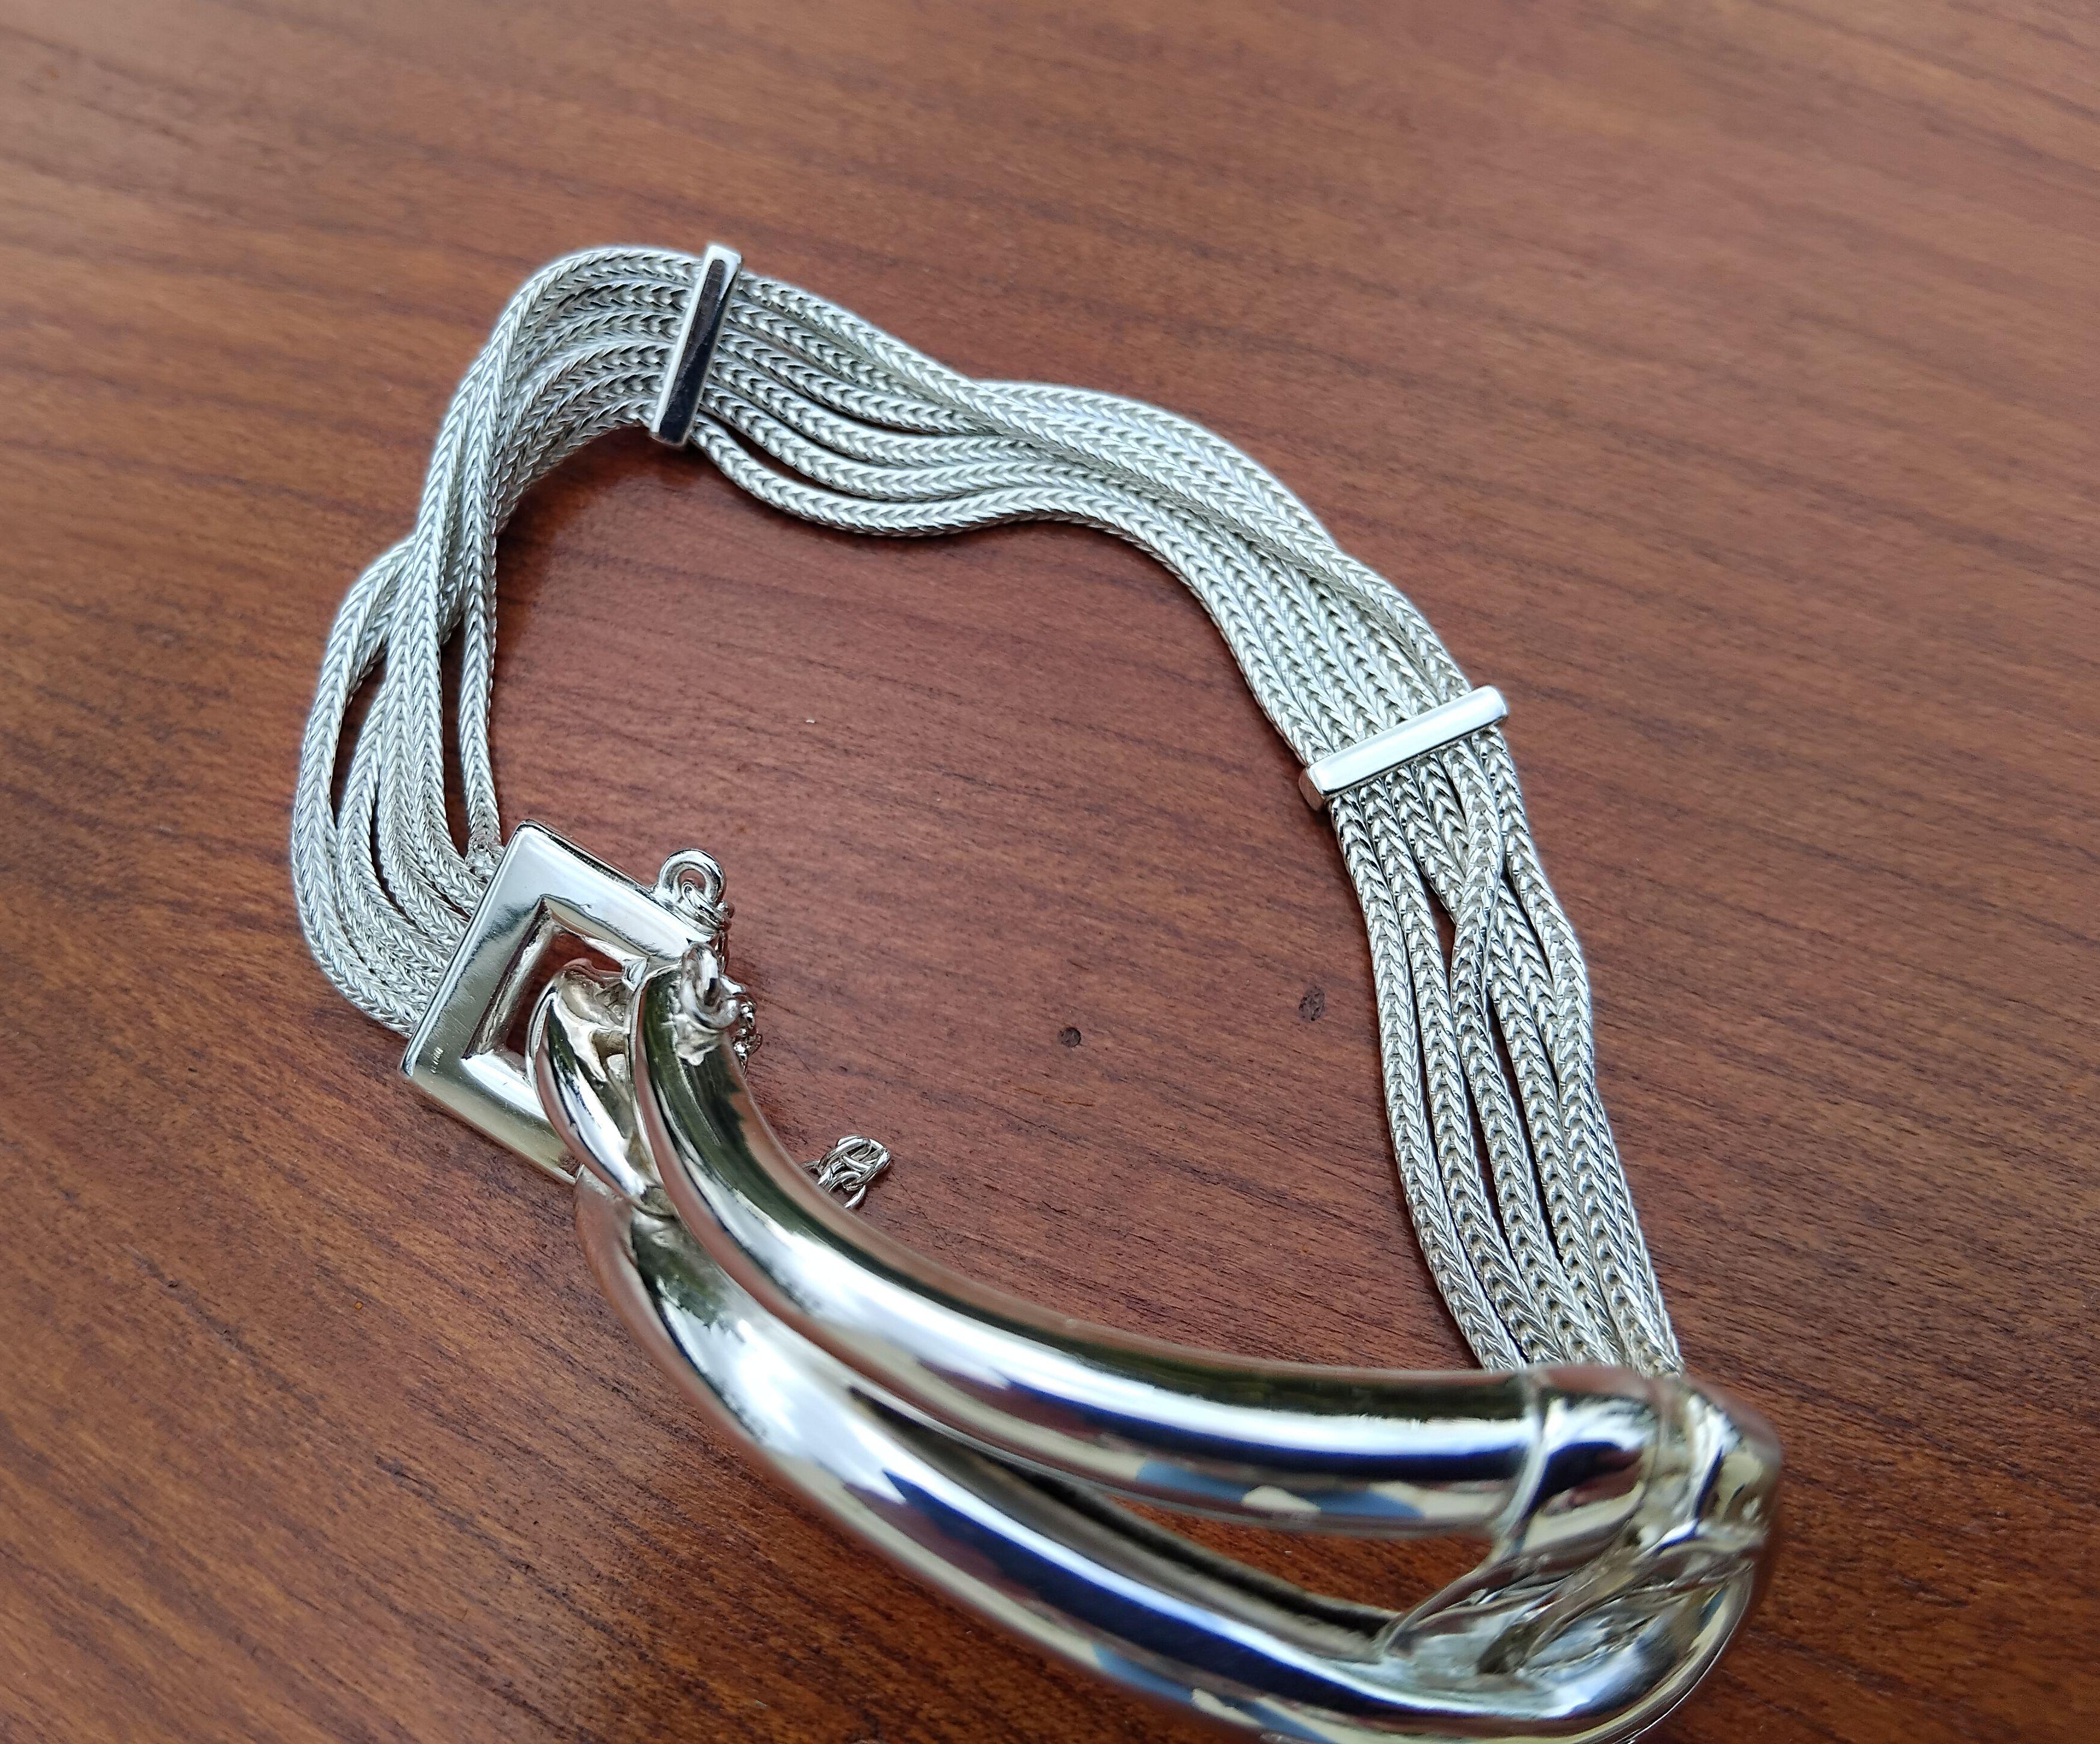 Exceptional Hermès Bracelet Equestrian Theme Stirrups Charms in Silver Texas  For Sale 3